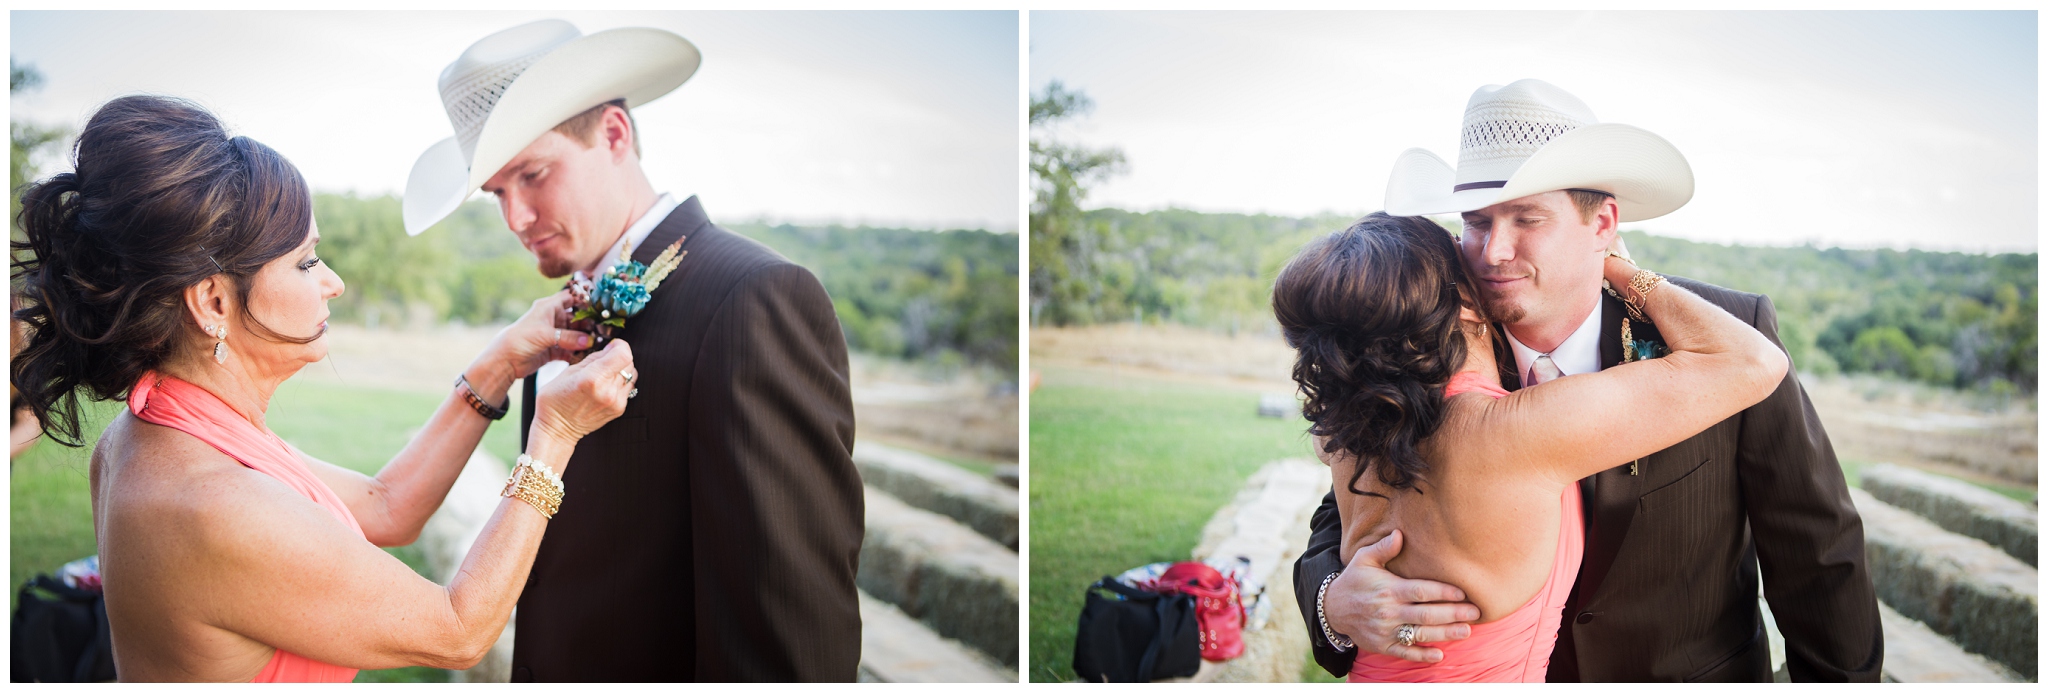 Boerne Wedding Photographer CW Hill Country Ranch Wedding Venue turquoise bronze brown wedding colors Fall Wedding 0030